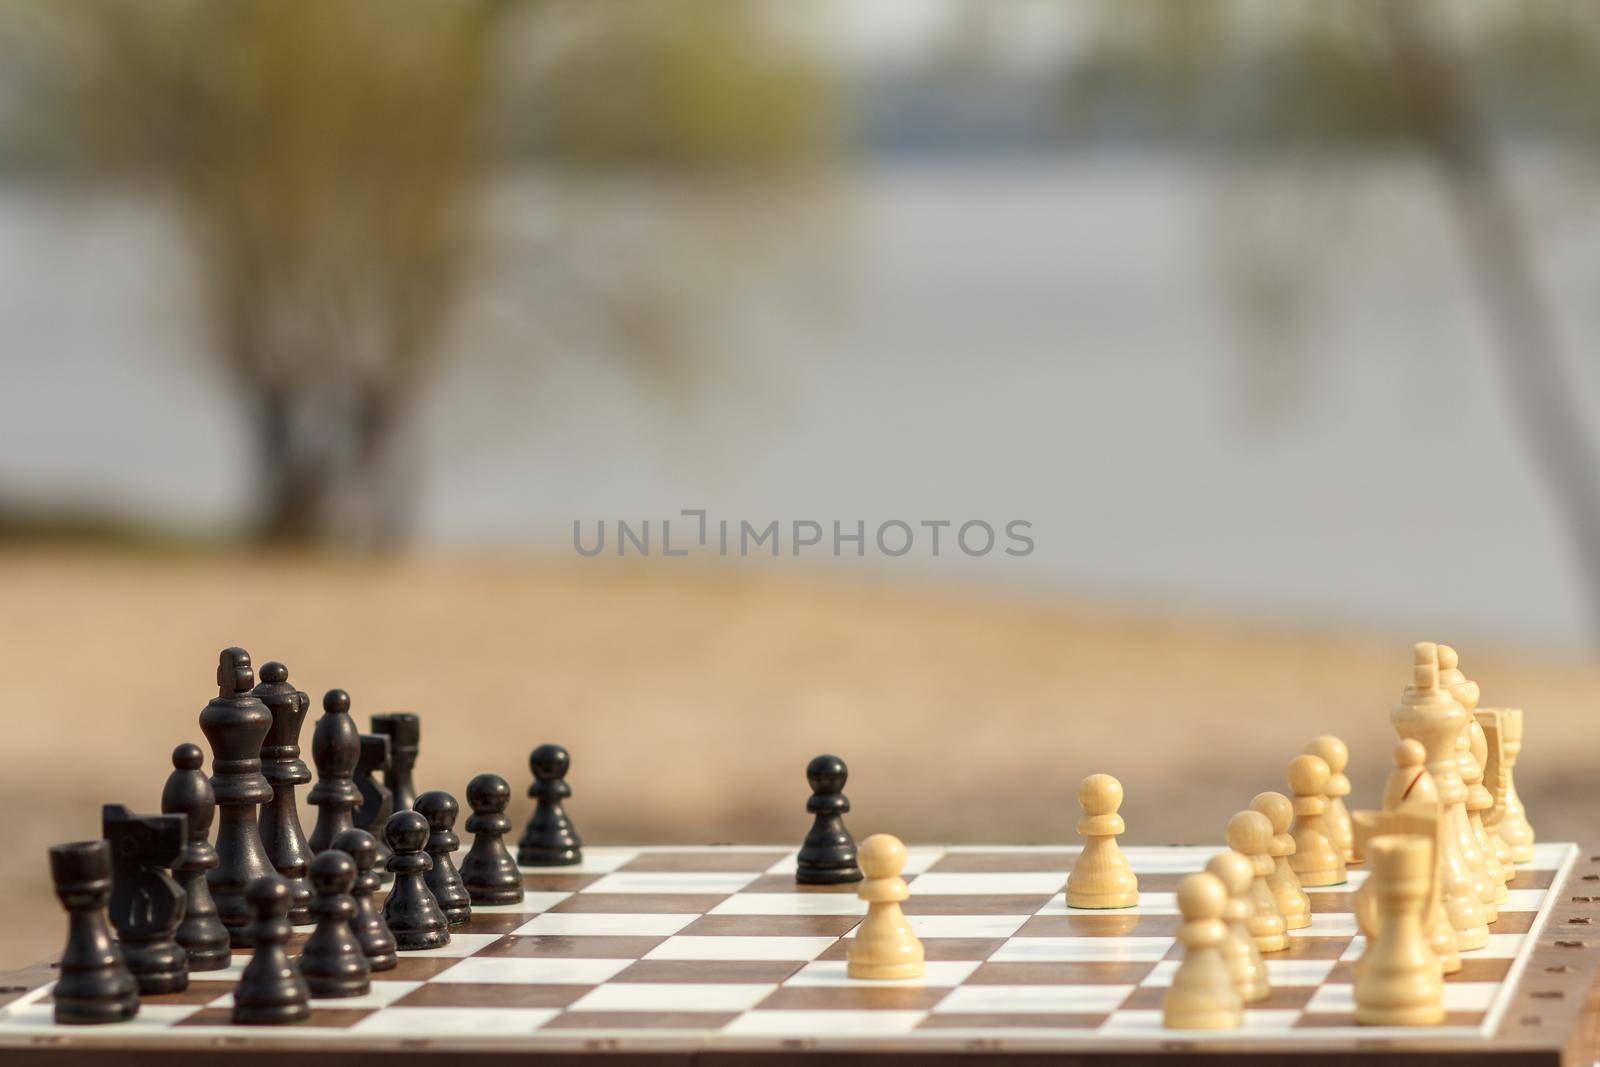 White chess pieces staying against black chess pieces Chess board with chess pieces on wooden bench with river embankment background Selective focus